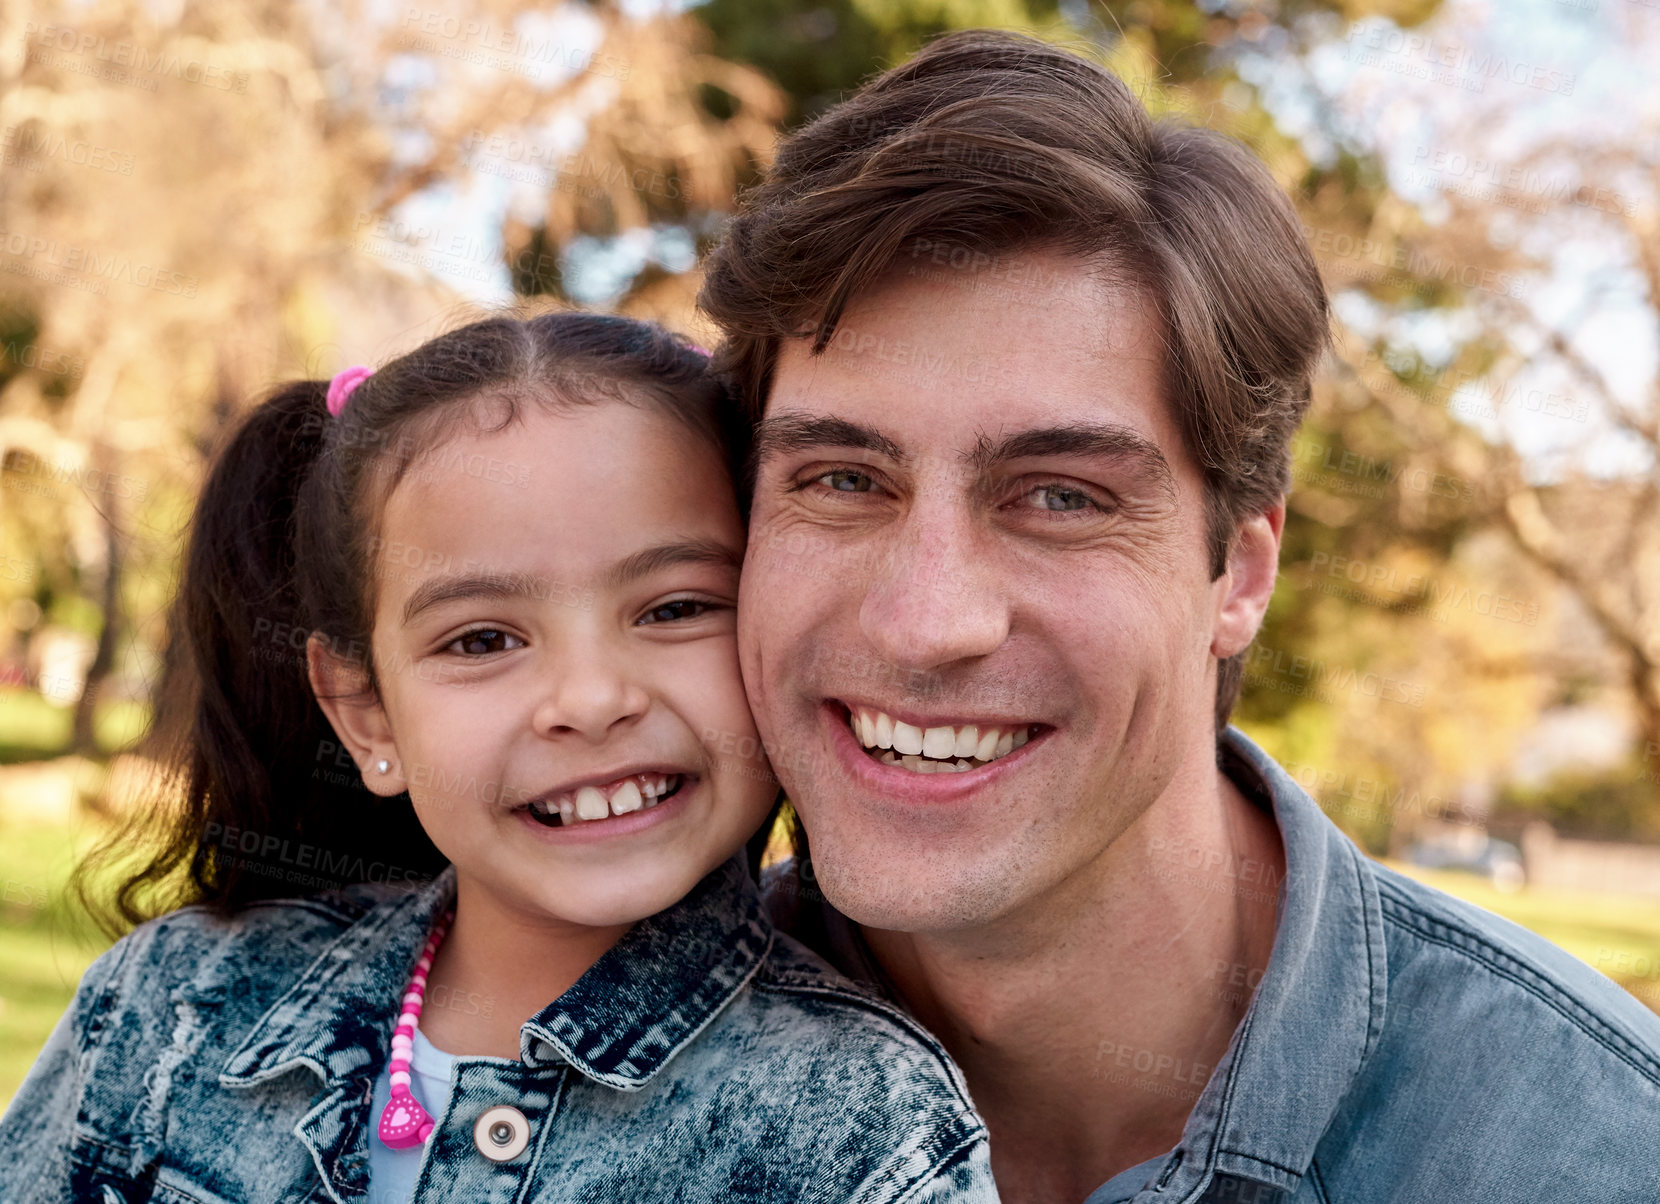 Buy stock photo Shot of an adorable little girl spending quality time with her father at the park